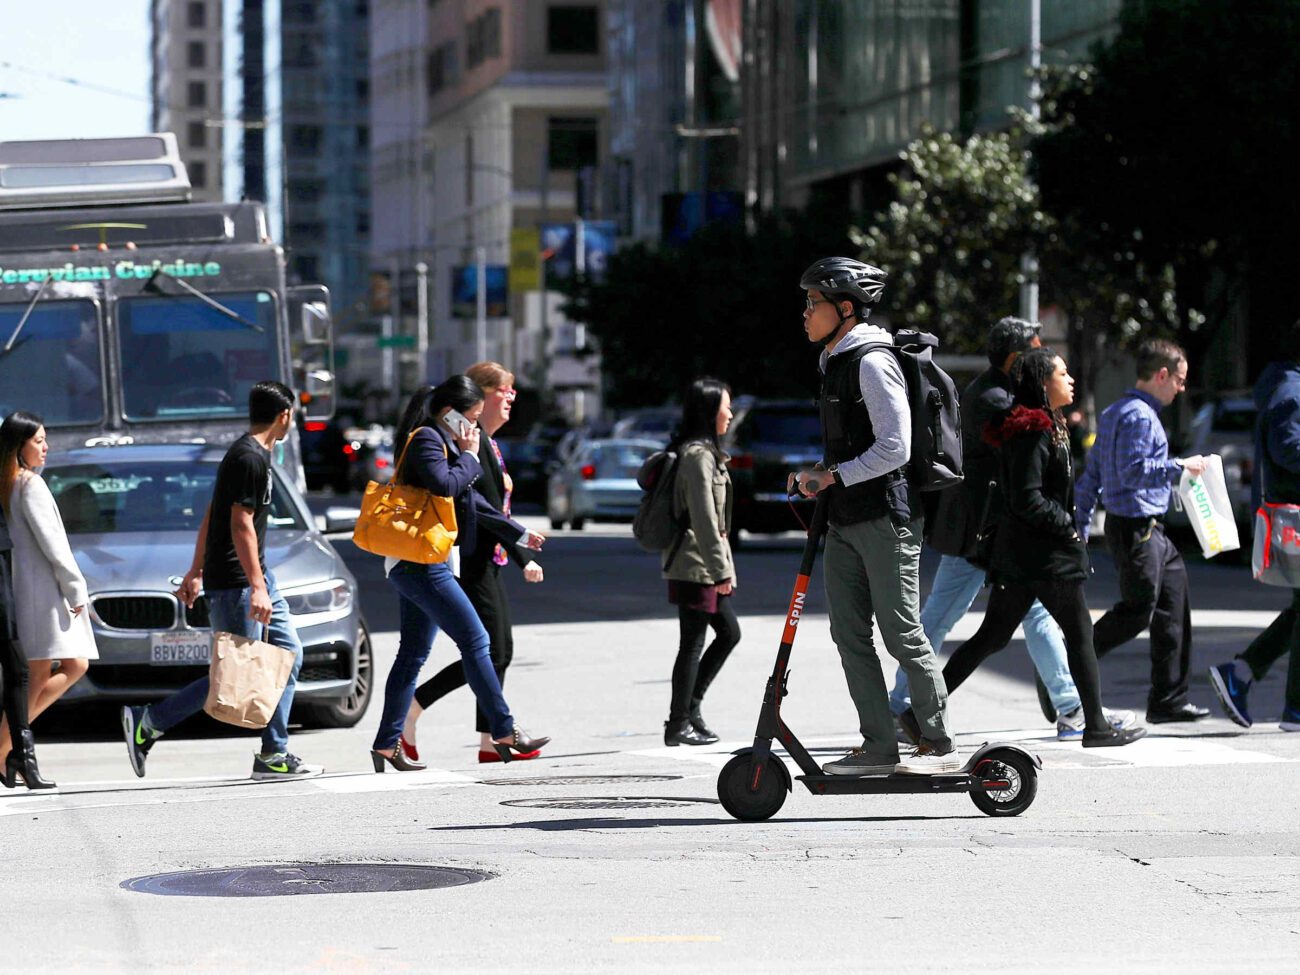 Grab a helmet and learn more about how the exciting prospects of riding electric scooters make them perfect for adults on the go in the city!